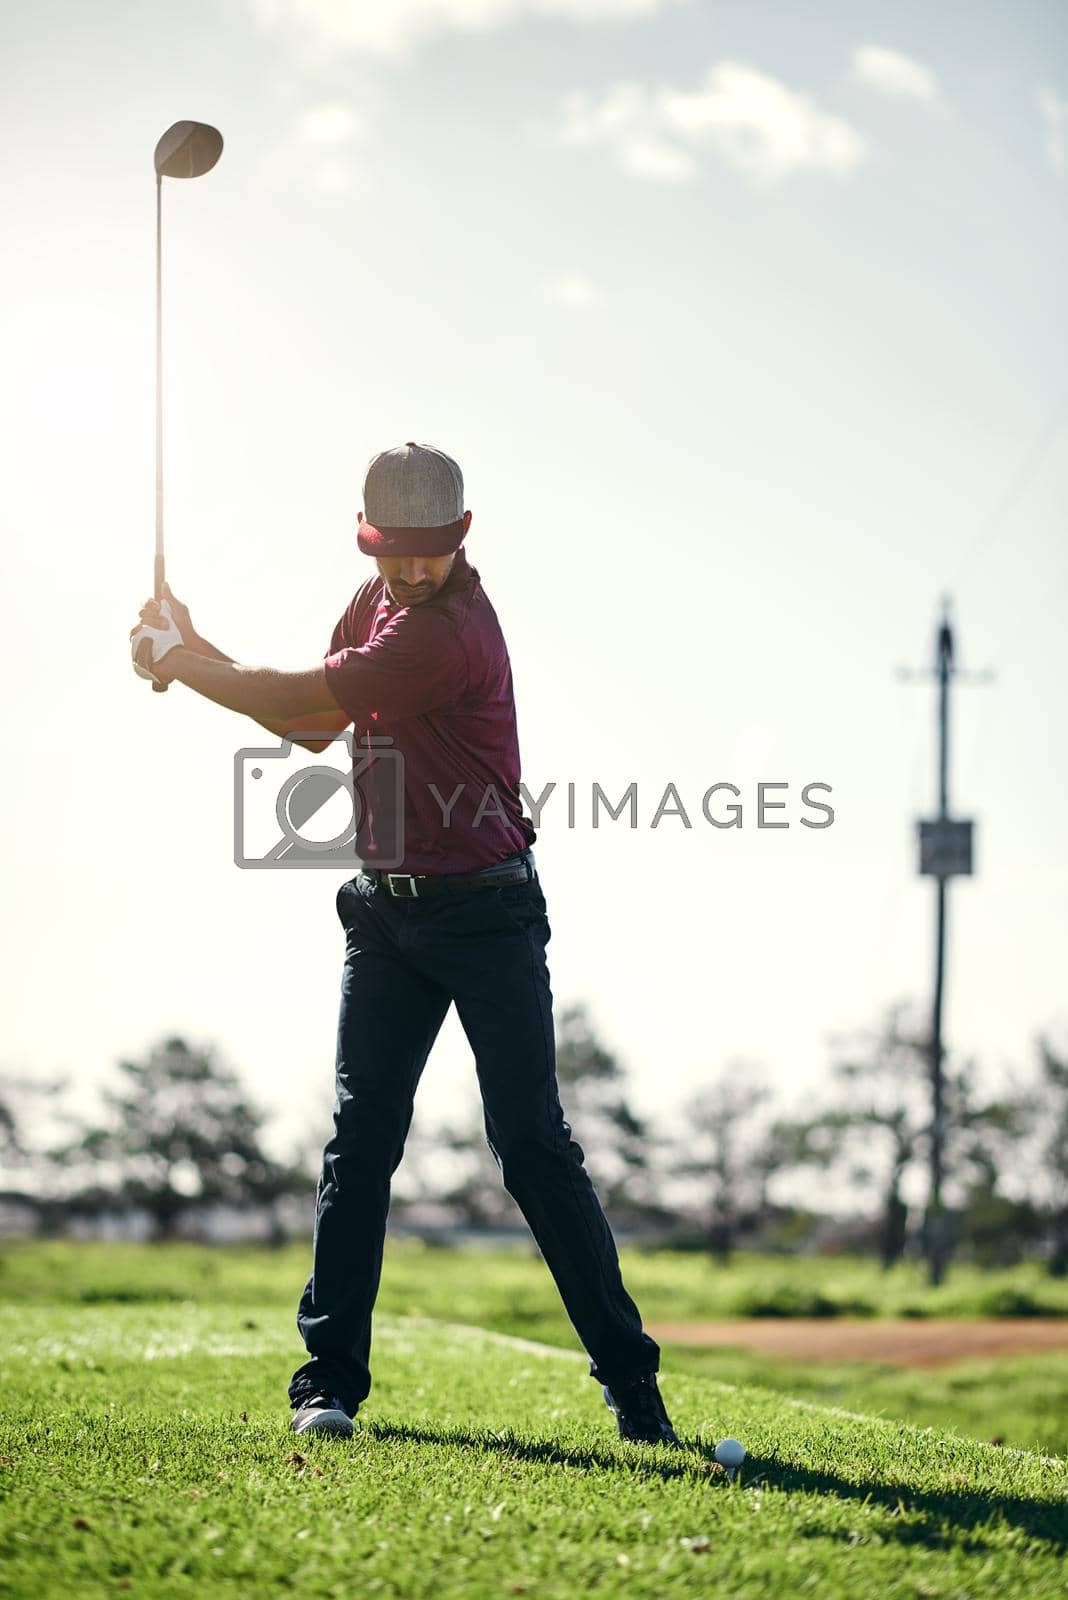 Royalty free image of Pull back and swing. a focused young male golfer about to swing and play a shot with his golf club outside on a course. by YuriArcurs